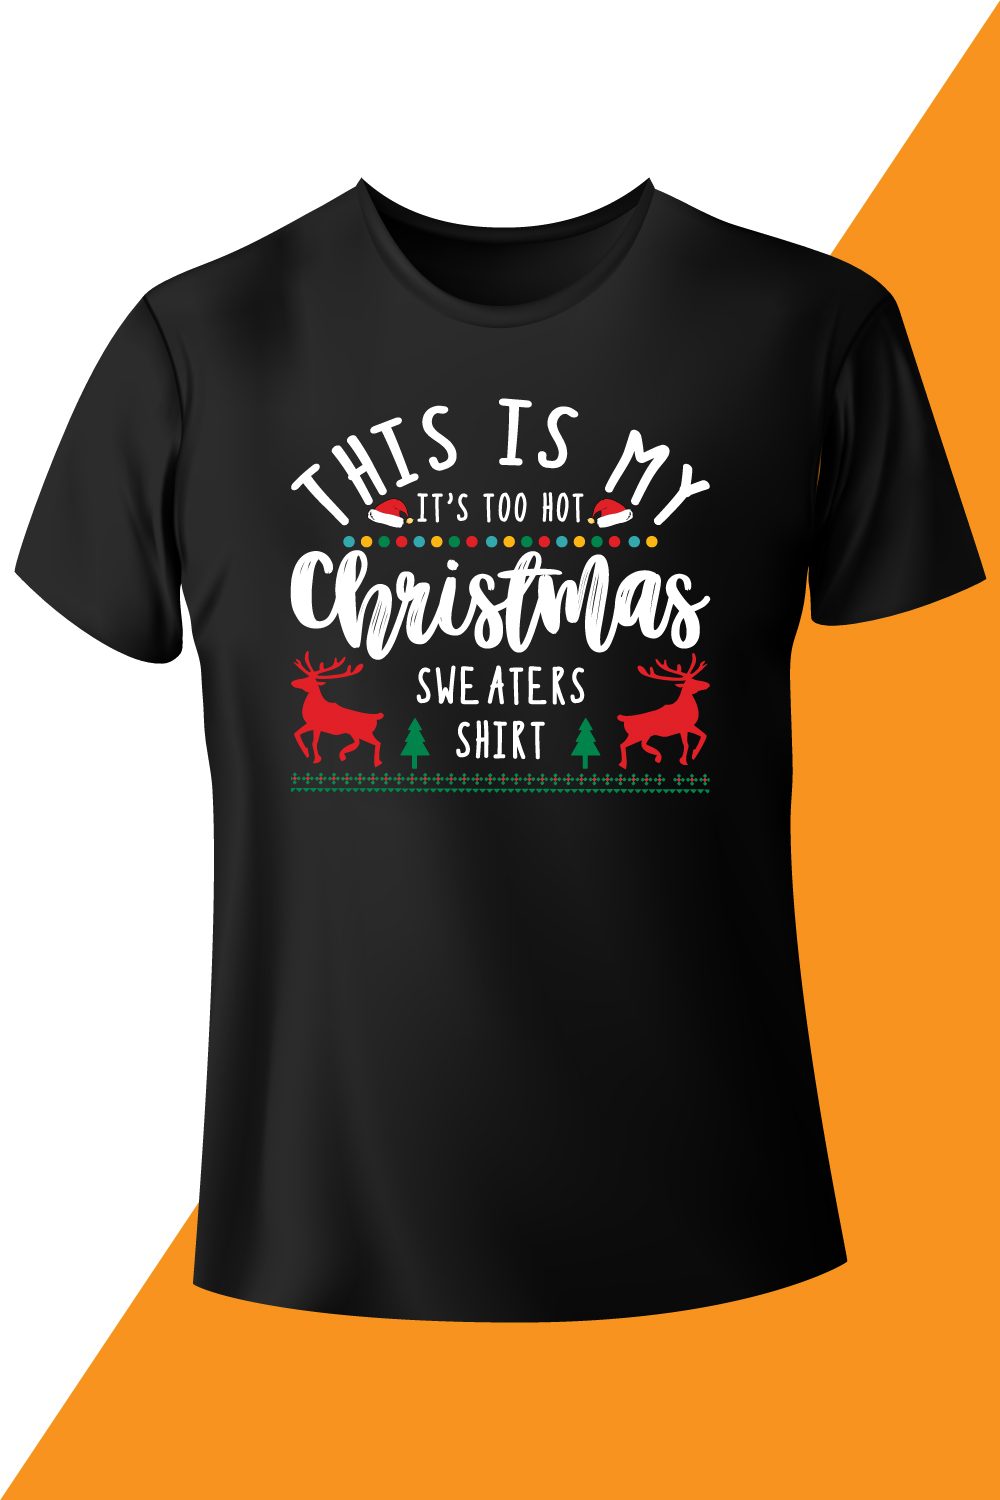 Image of a black t-shirt with a charming inscription this is my it's too hot christmas sweaters shirt.